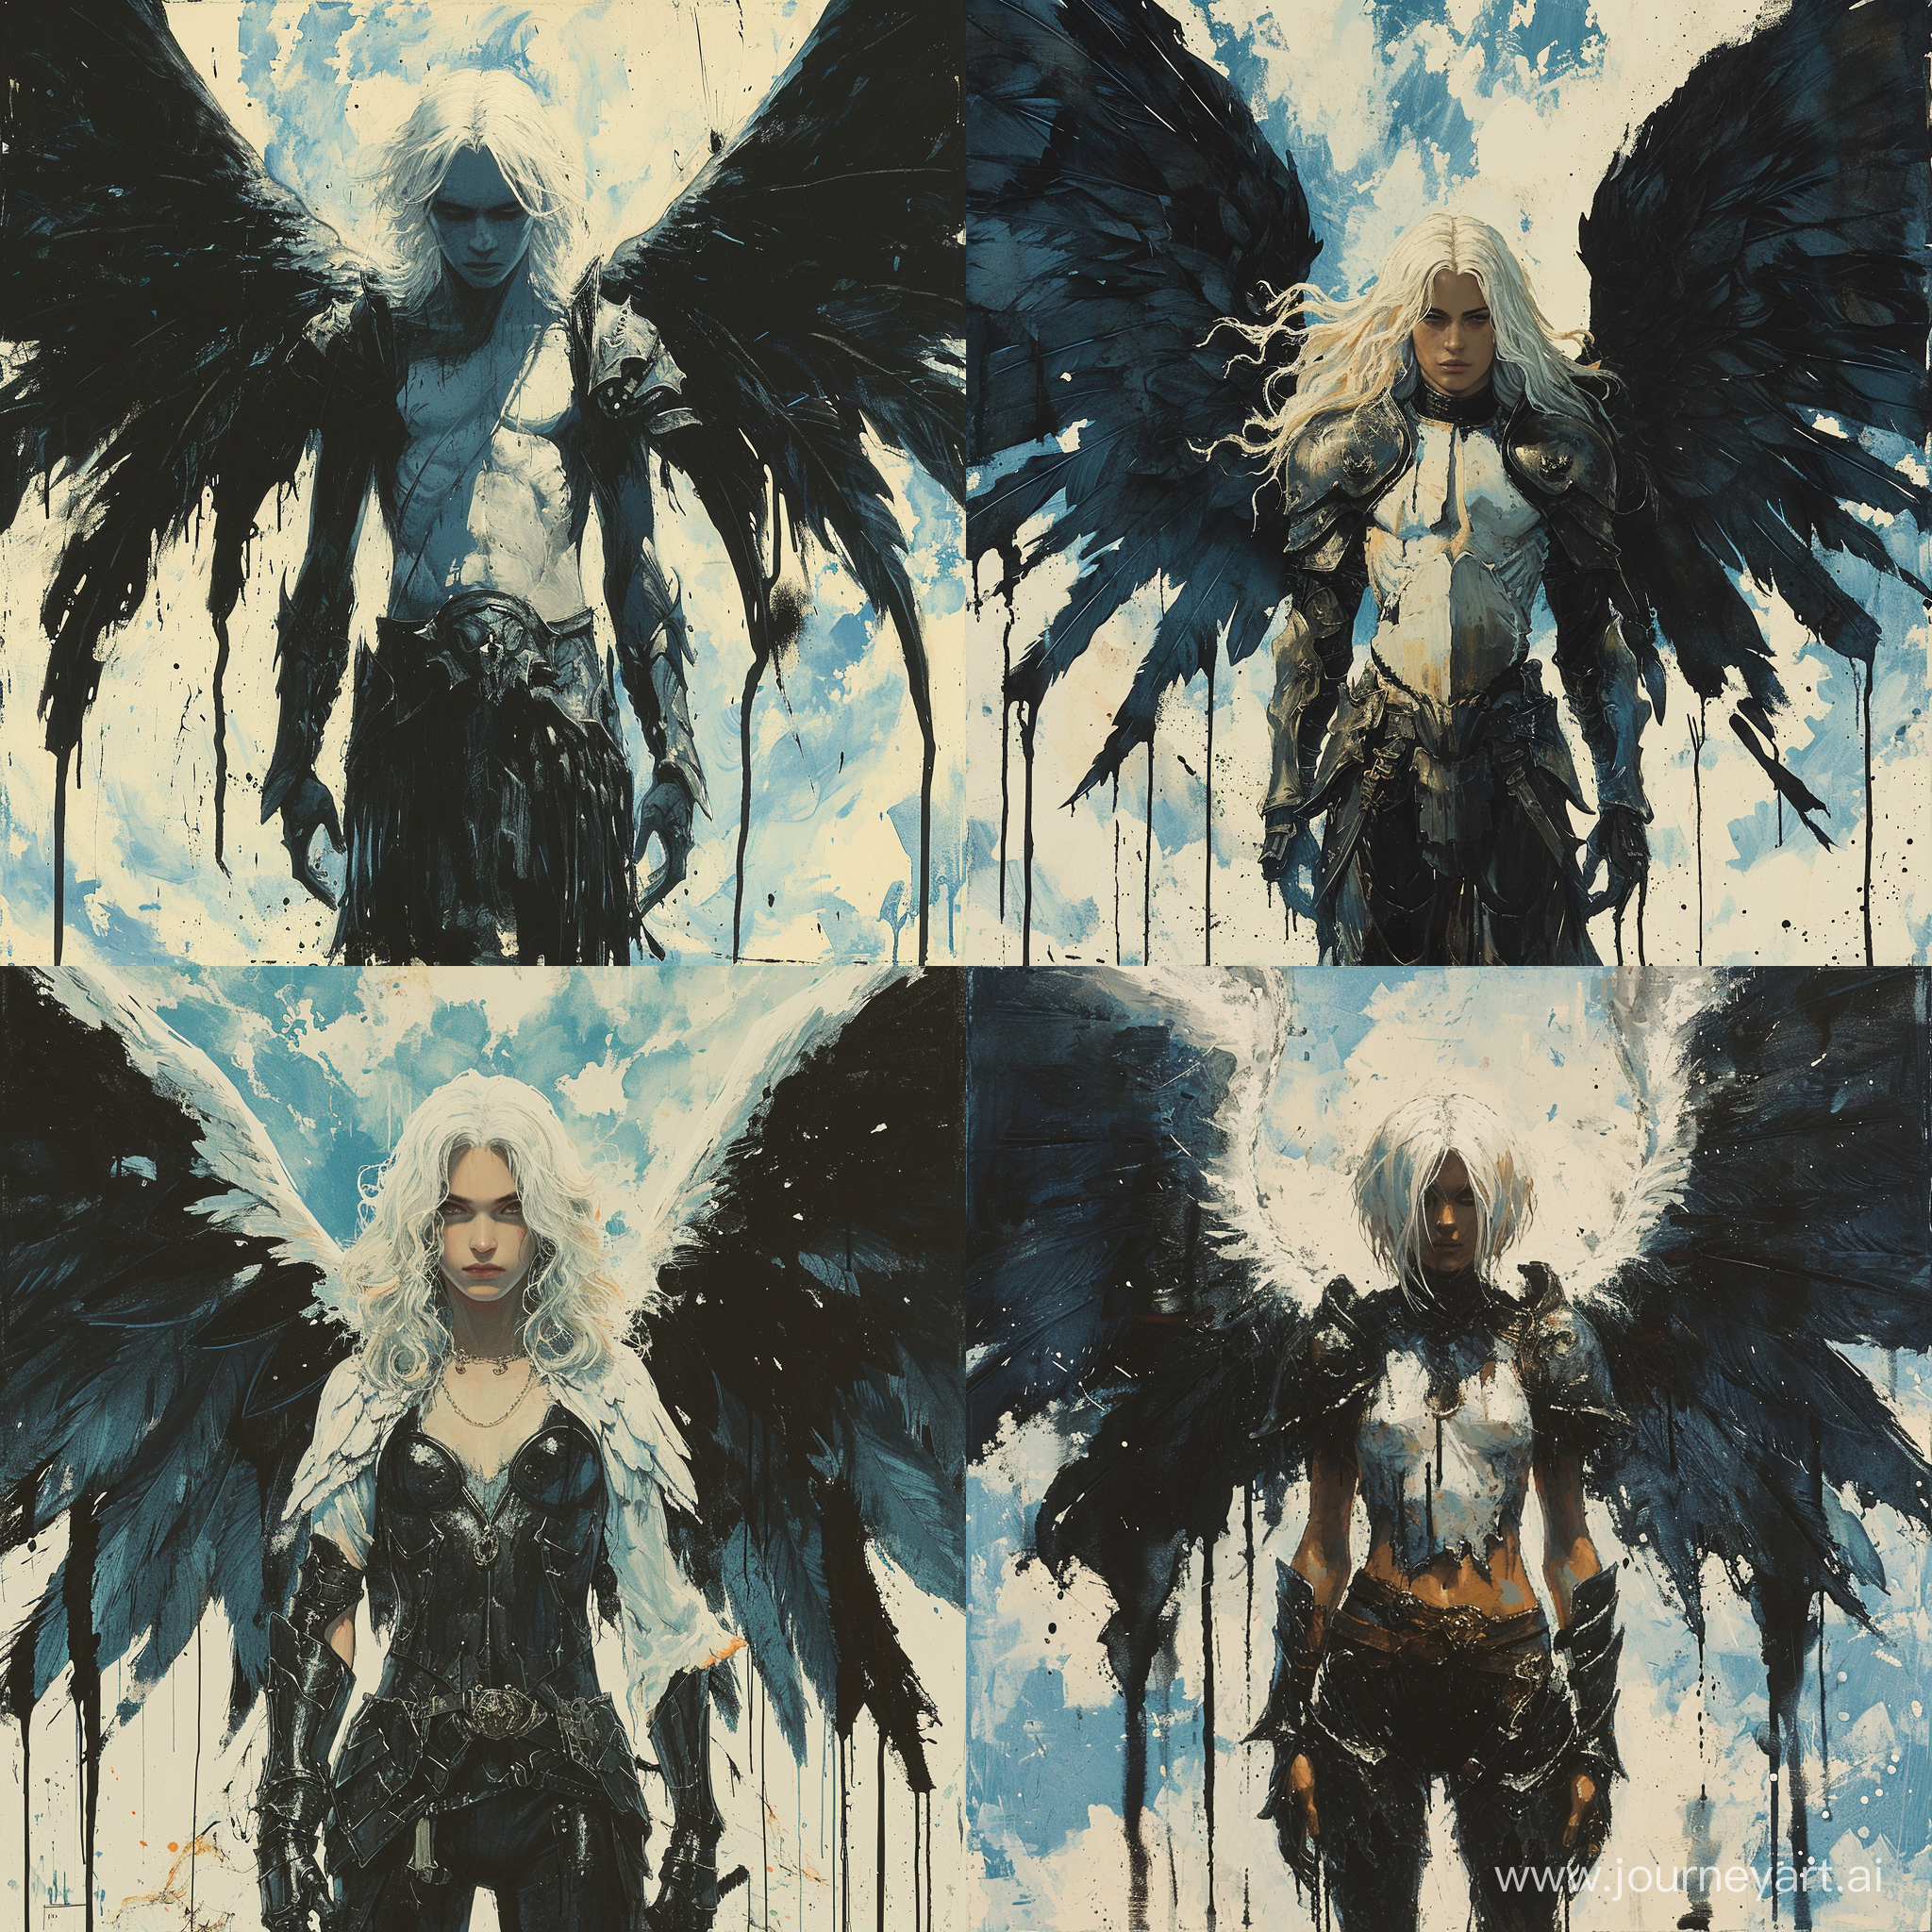 color monotype print, dark angel with large black wings, standing in front of a sky background with white and blue hues, the angel has white hair and is wearing a armor-like outfit, the wings are spread out and there are black paint drips trailing from them, --s 500